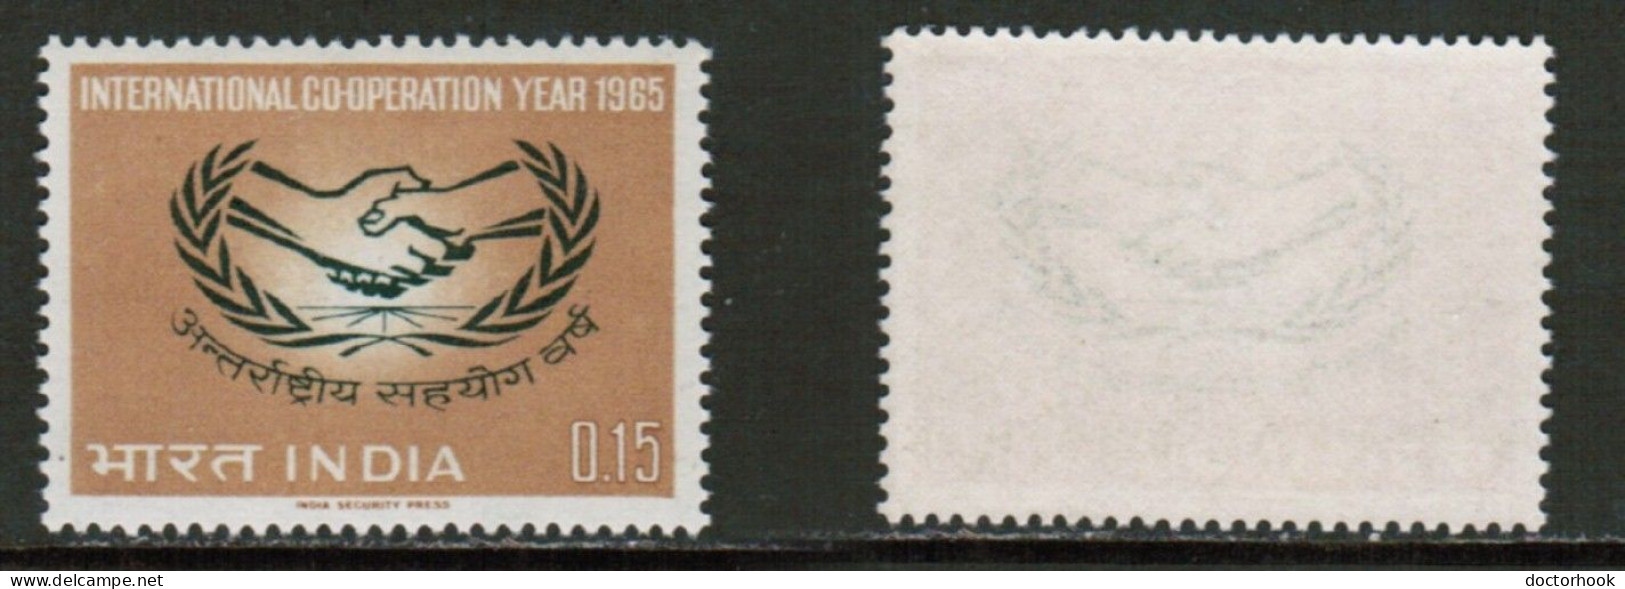 INDIA   Scott # 403** MINT NH (CONDITION AS PER SCAN) (Stamp Scan # 919-6) - Neufs